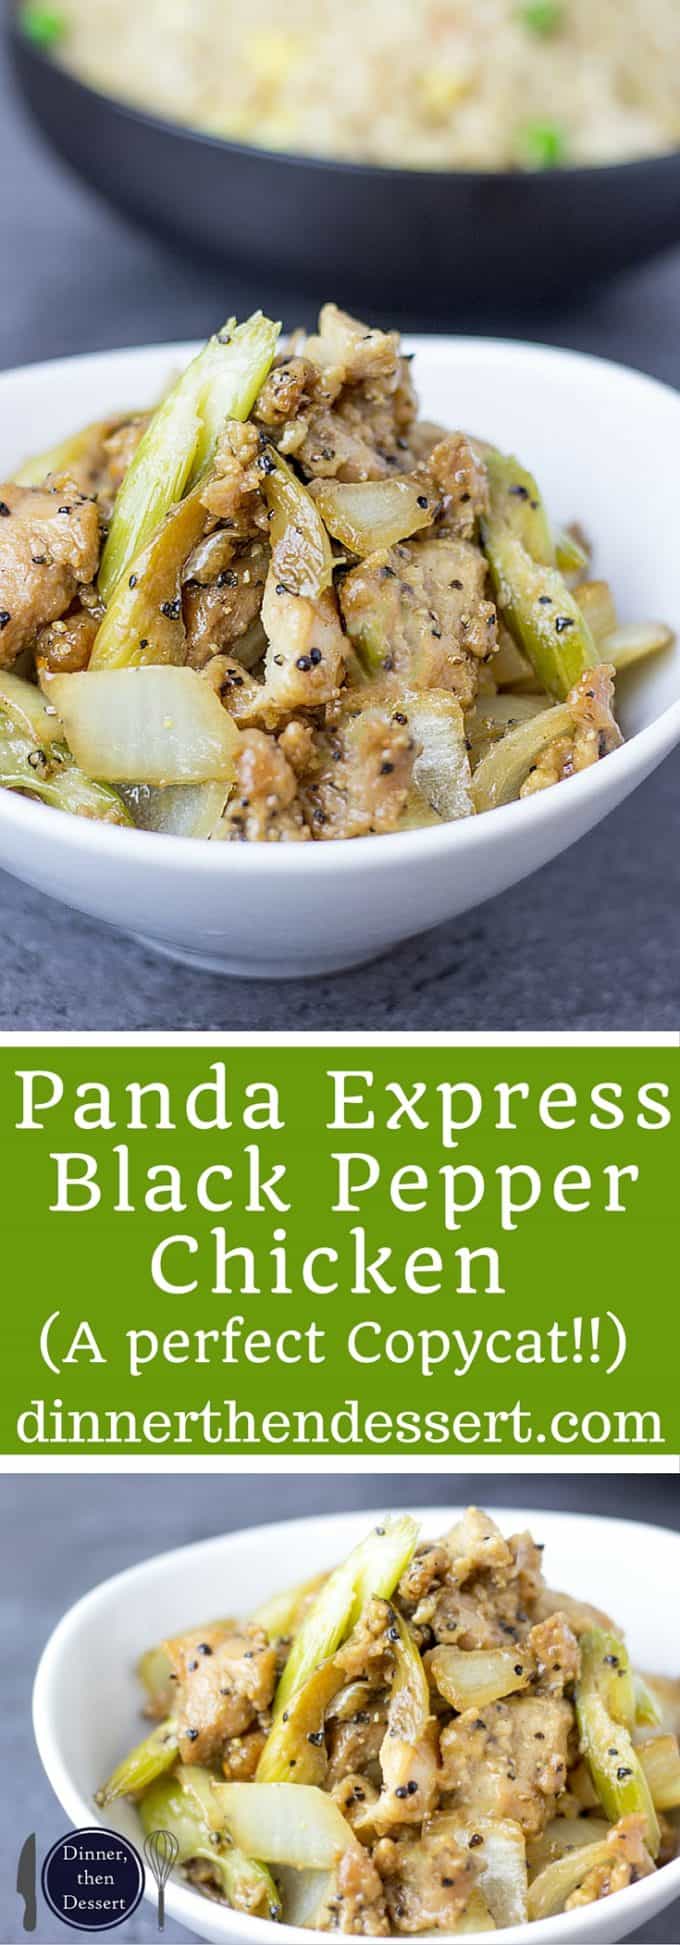 Panda Express Black Pepper Chicken is marinated ginger soy chicken, in a peppery black pepper sauce with celery and onions that tastes exactly like the Panda Express version you love! And really low in fat and WW points!